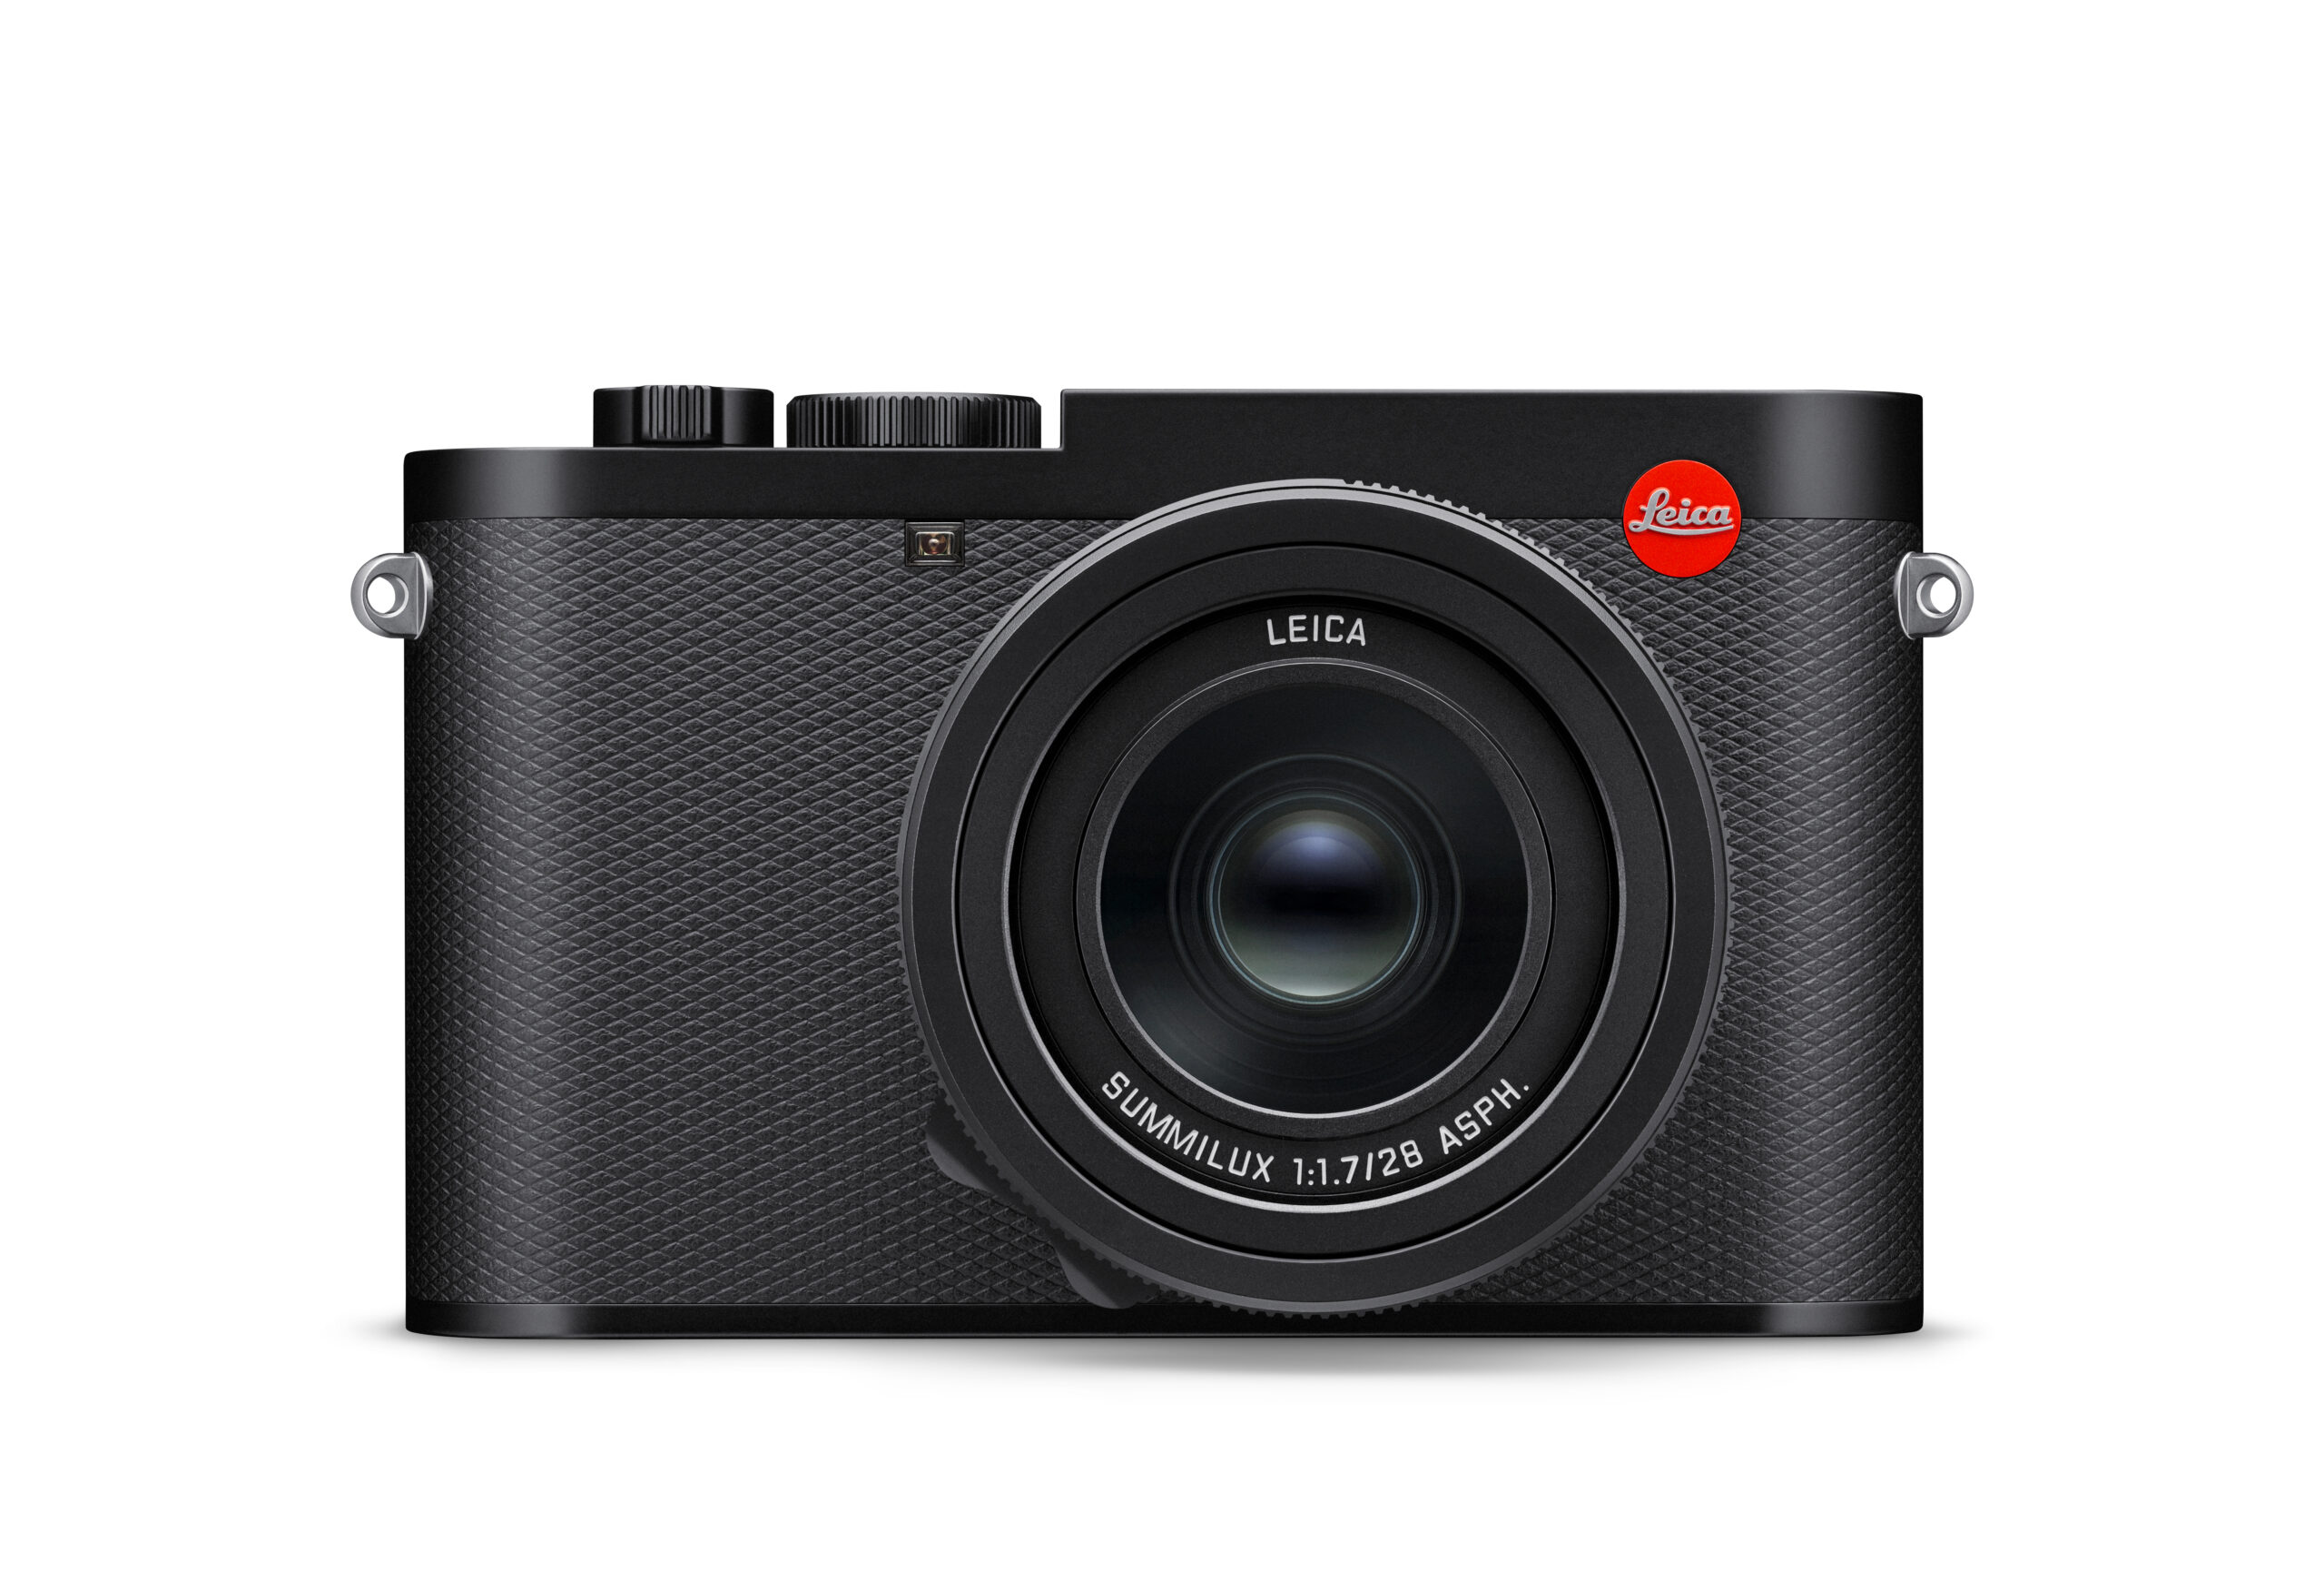 TGIFriday Review: the new Leica Q3 